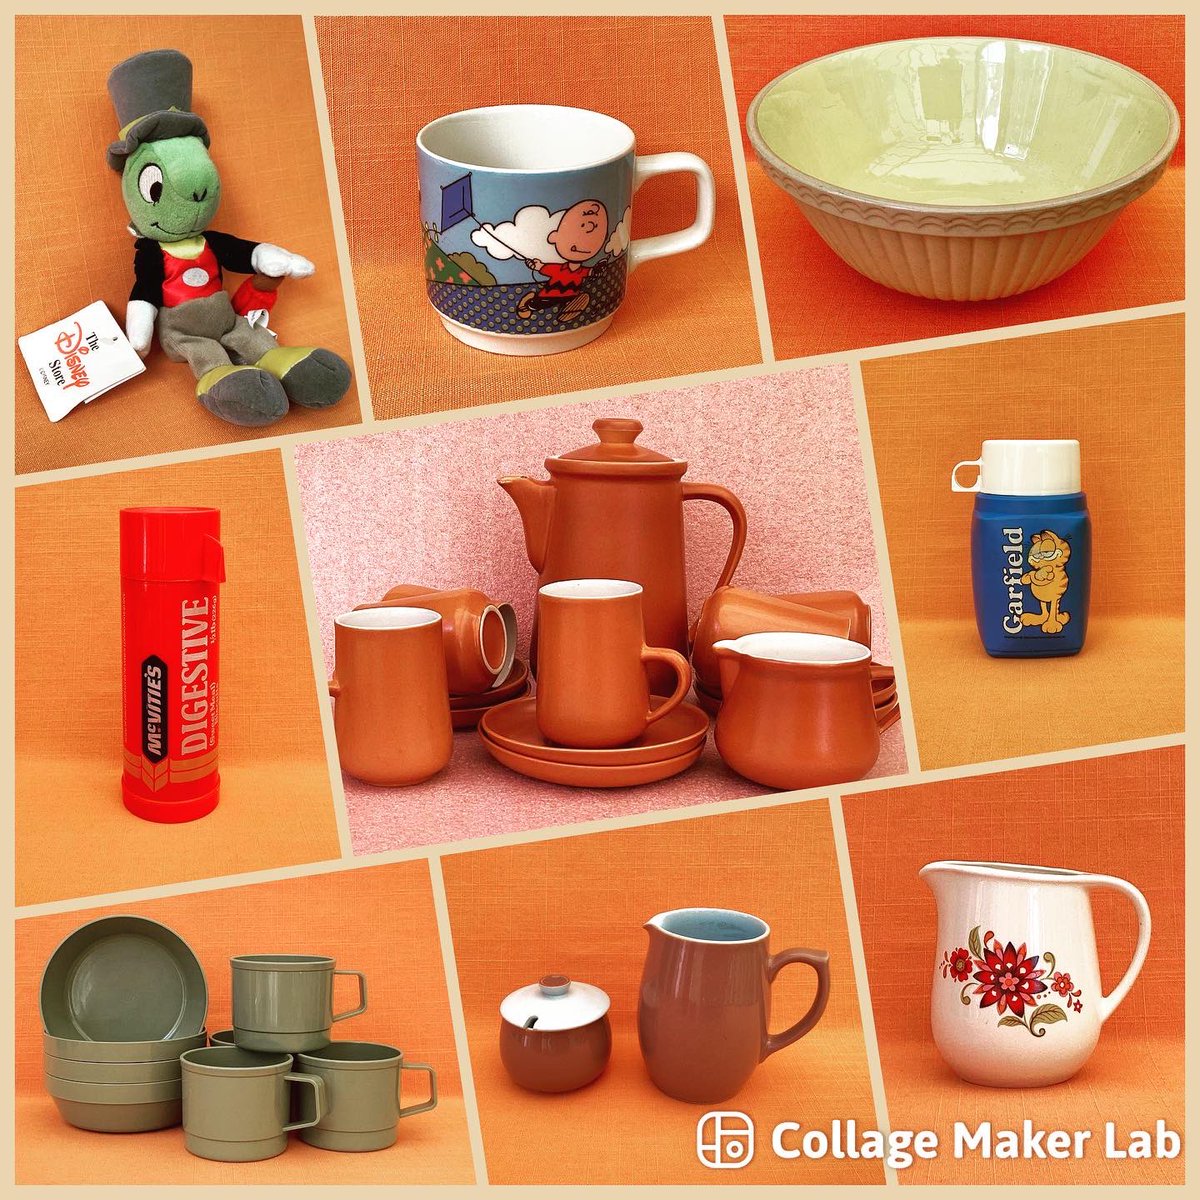 Morning all, Just sharing my latest #retro listings, an eclectic mix 😄 #jiminycricket #charliebrown #peanuts #tggreen #vintagemixingbowl #mcvitiesdigestives #aladdinflask #honitonpottery #garfield #retrothermos #avocadogreen #retropicnic #langleymill #romanianpottery #etsy